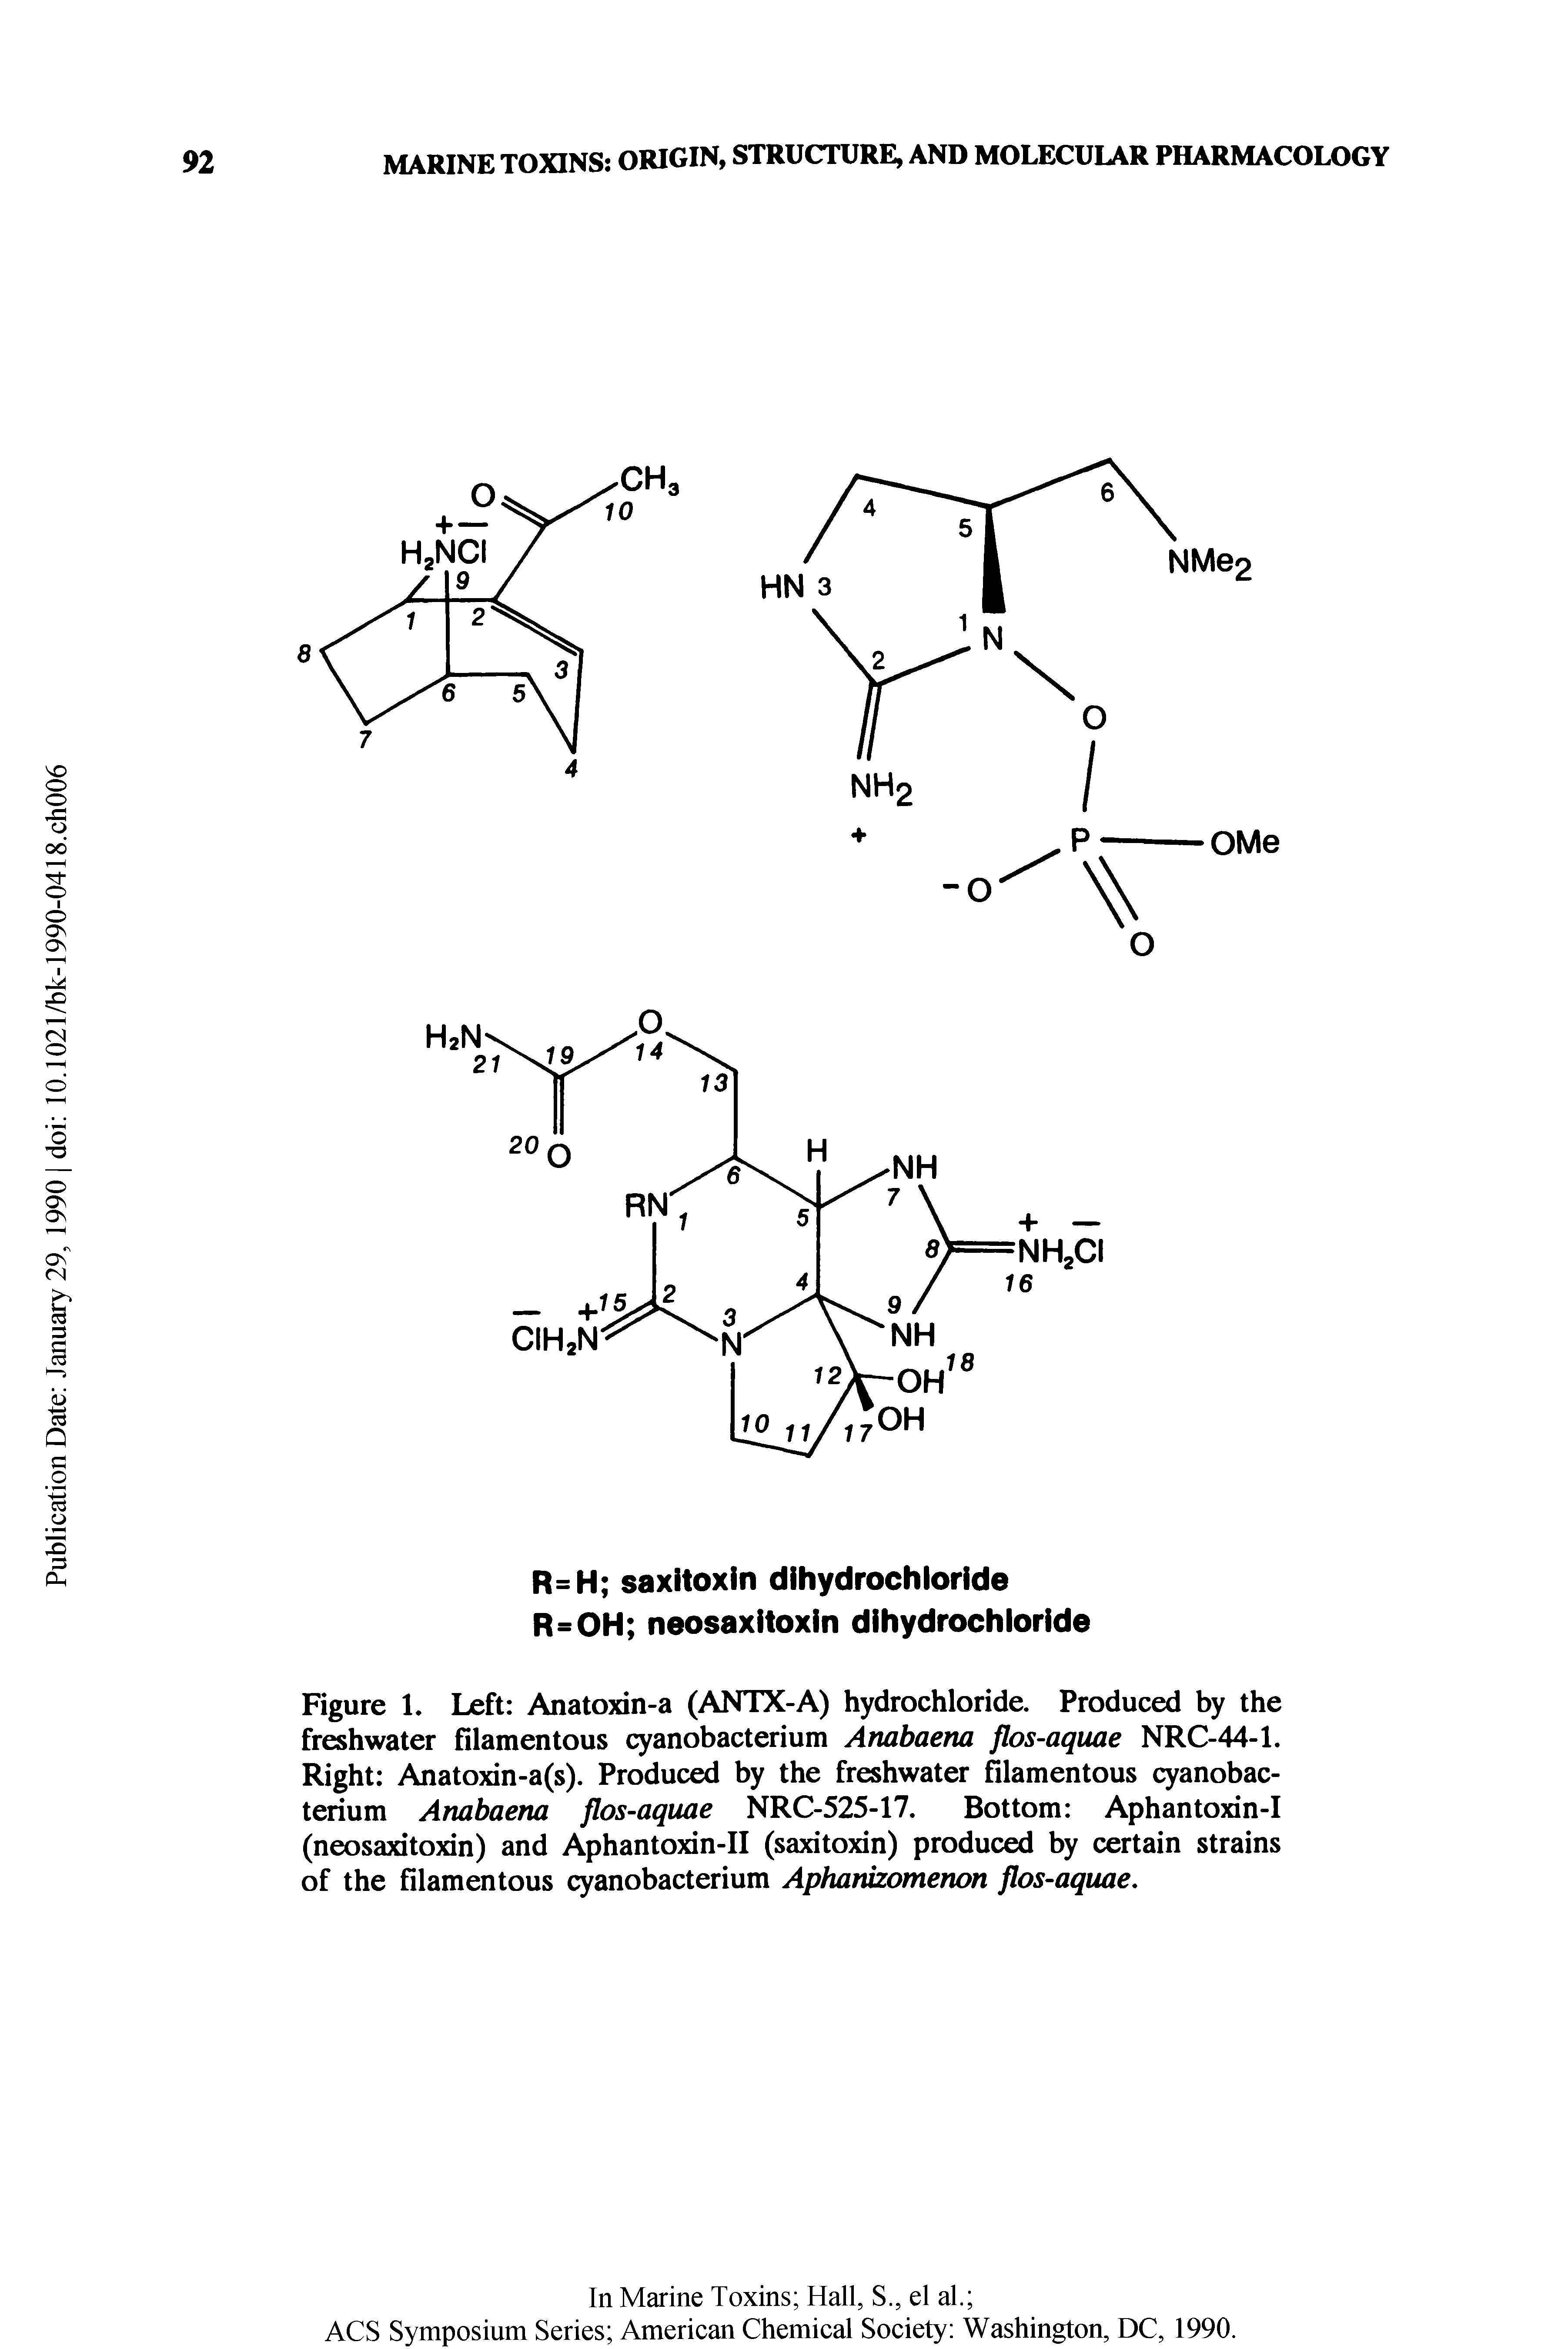 Figure 1. Left Anatoxin-a (ANTX-A) hydrochloride. Produced by the freshwater filamentous cyanobacterium Anabaena flos-aquae NRC-44-1. Right Anatoxin-a(s). Produced by the freshwater filamentous cyanobacterium Anabaena flos-aquae NRC-525-17. Bottom Aphantoxin-I (neosaxitoxin) and Aphantoxin-II (saxitoxin) produced by certain strains of the filamentous cyanobacterium Aphantomenon flos-aquae.